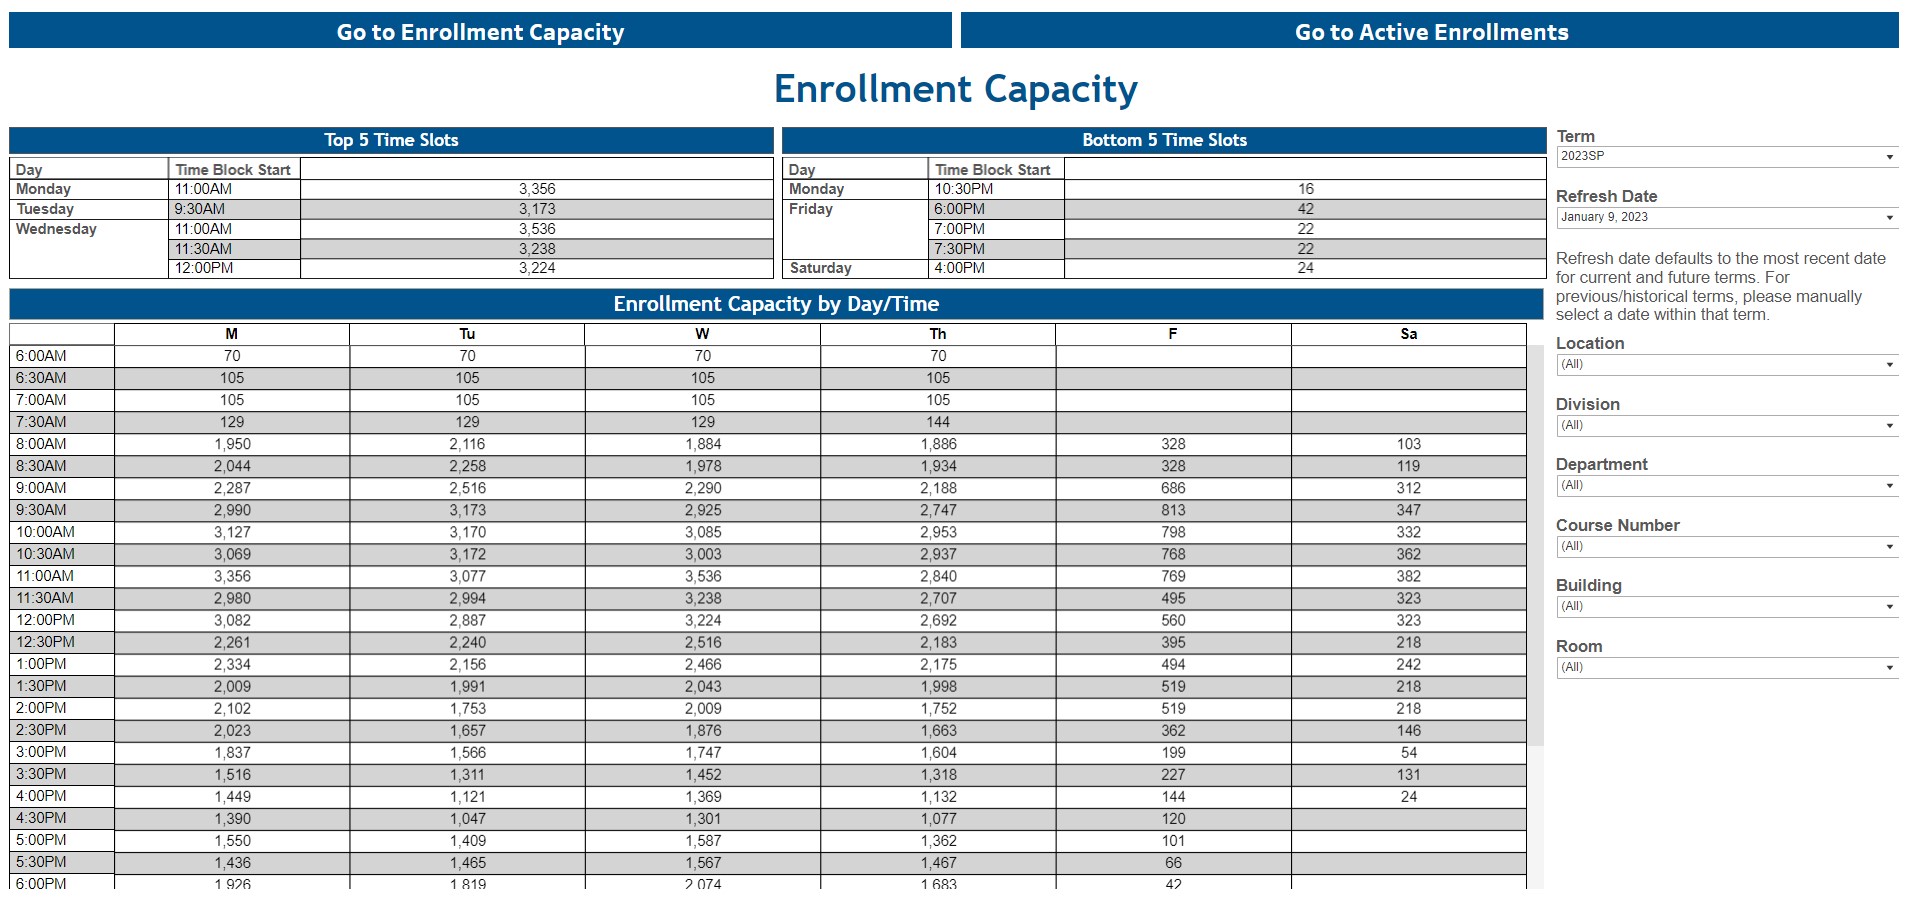 Enrollment Capacity and Active Enrollments by Schedule